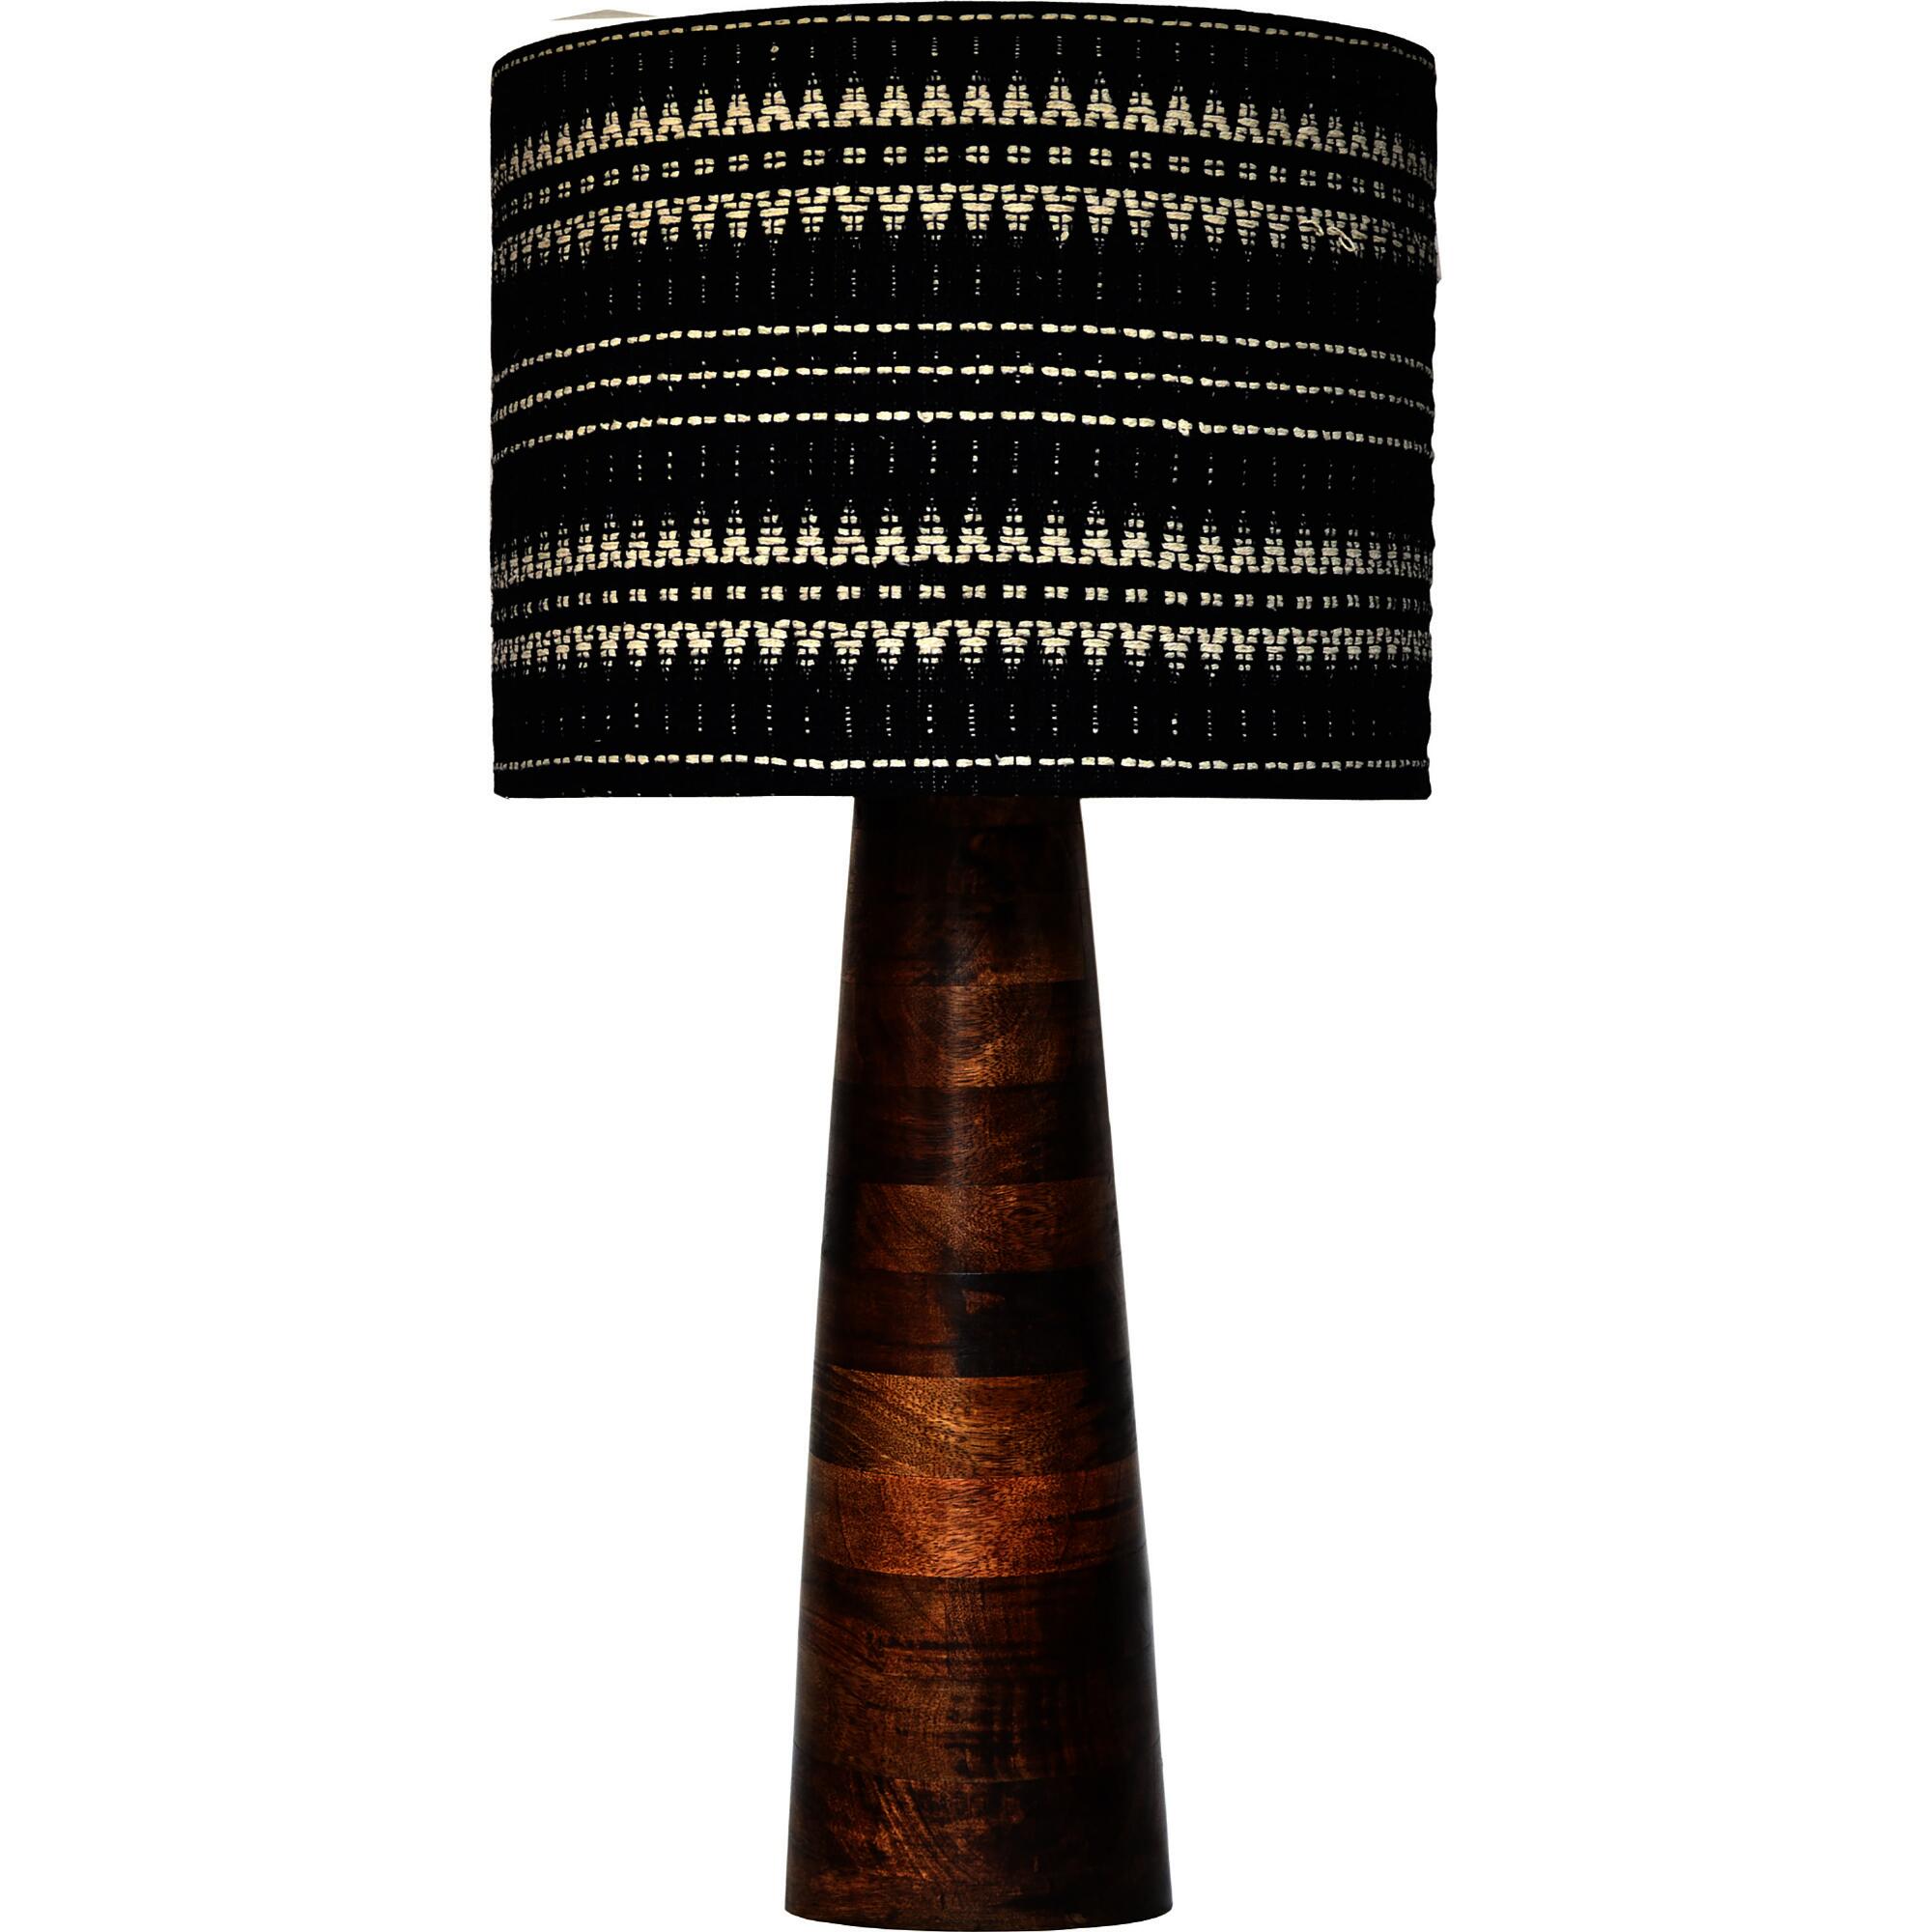 Mango Wood Geo Willow Table Lamp: Brown by World Market